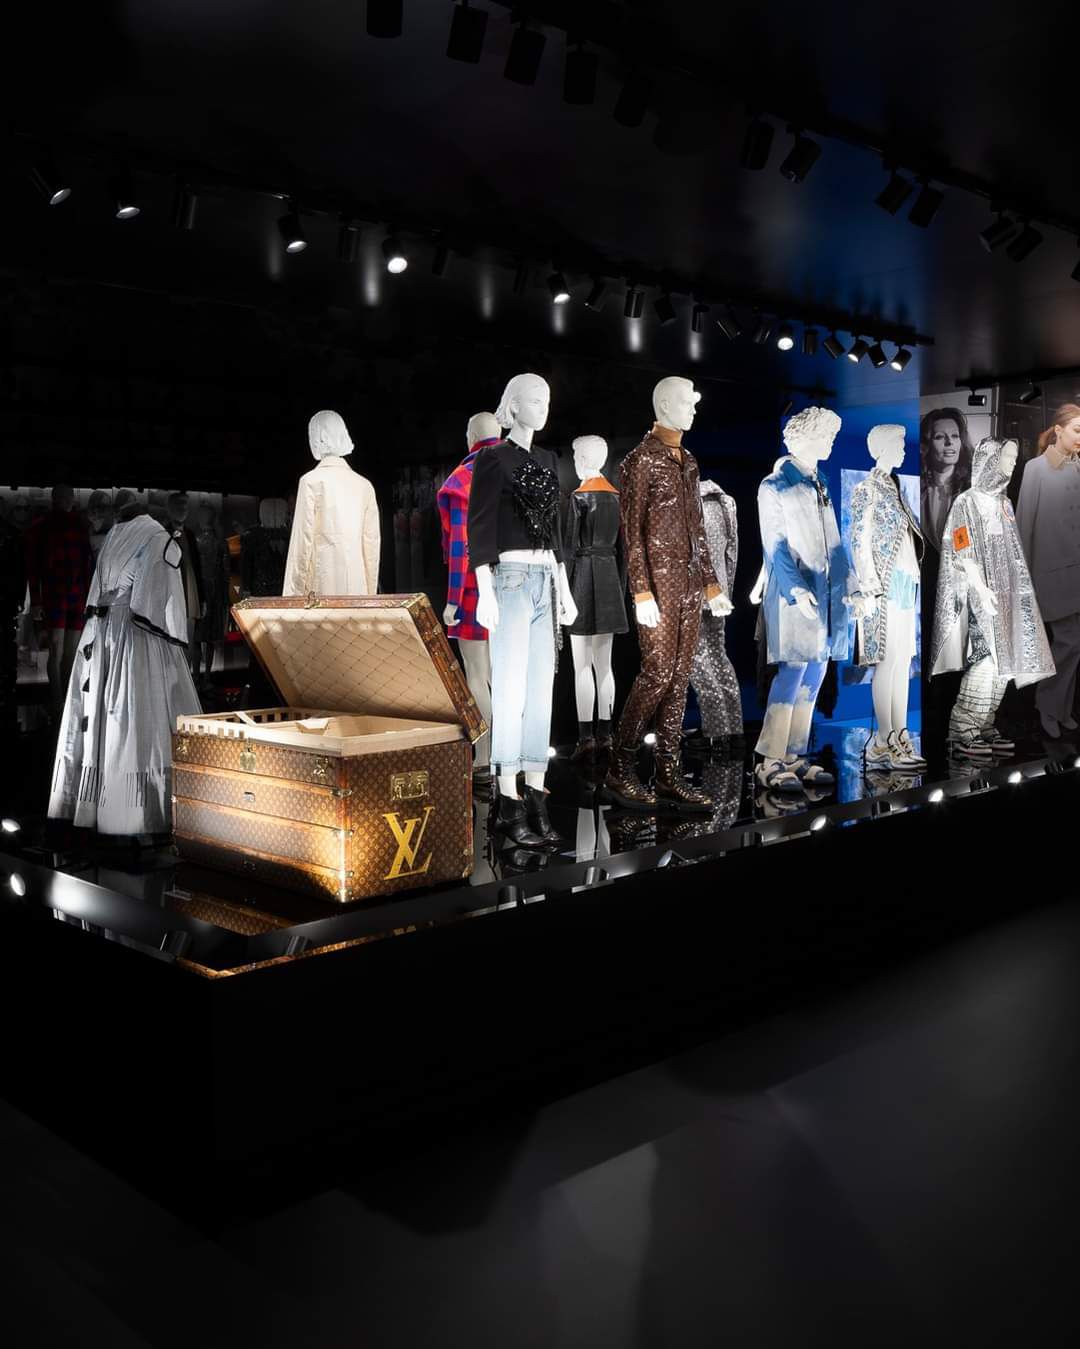 SeeLV Exhibition Opens in Sydney - See 160 Years of Louis Vuitton